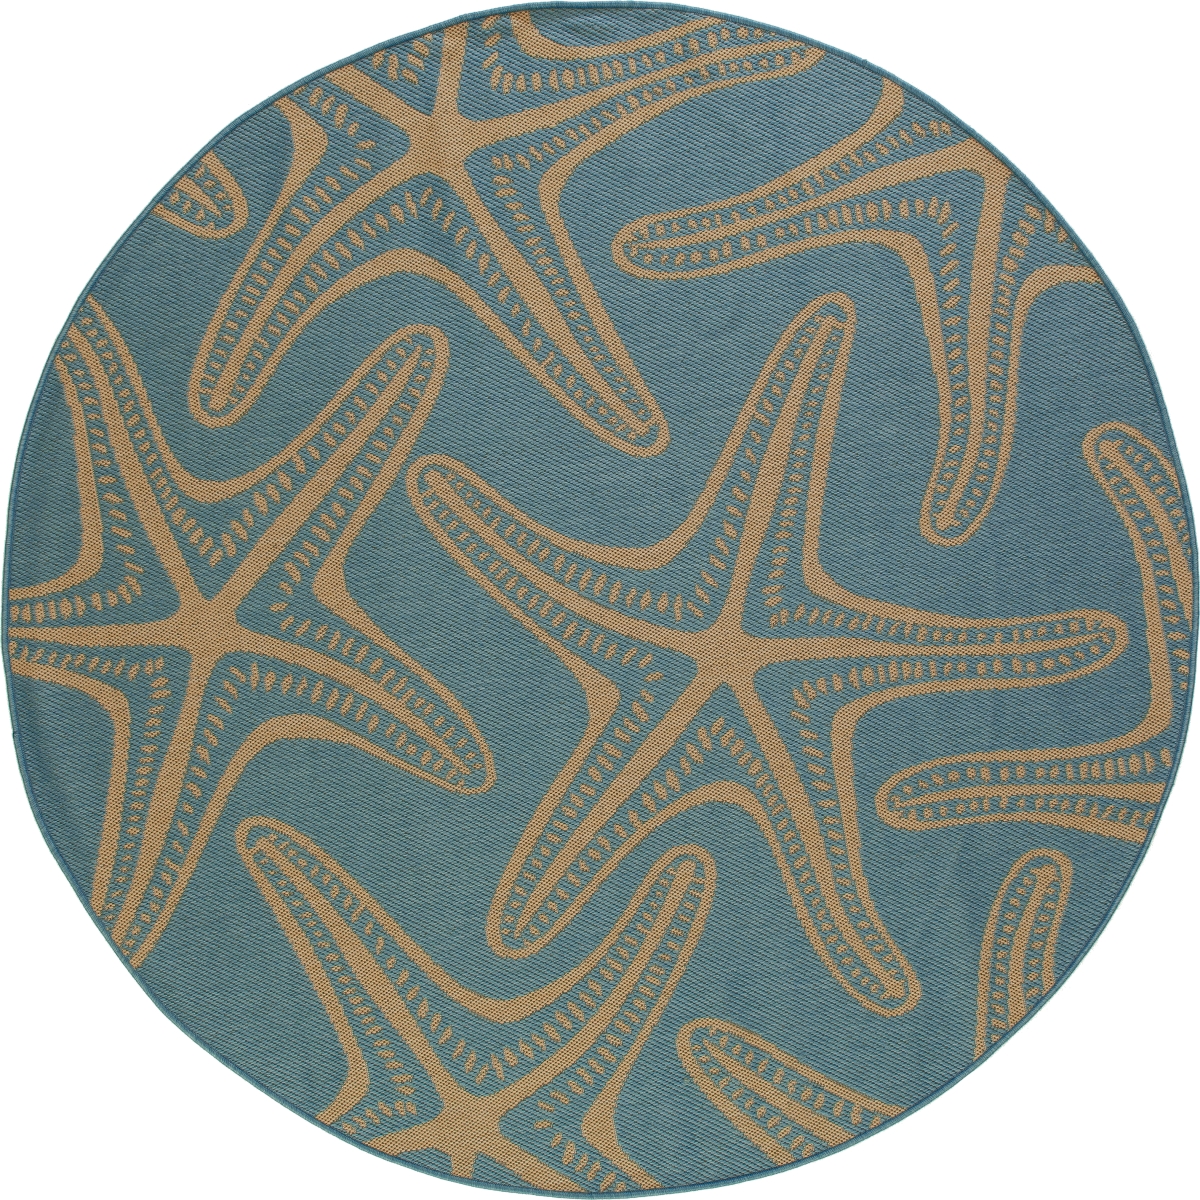 29472 8 Ft. Plymouth Collection Starfish Flat Woven Indoor & Outdoor Round Area Rug, Blue